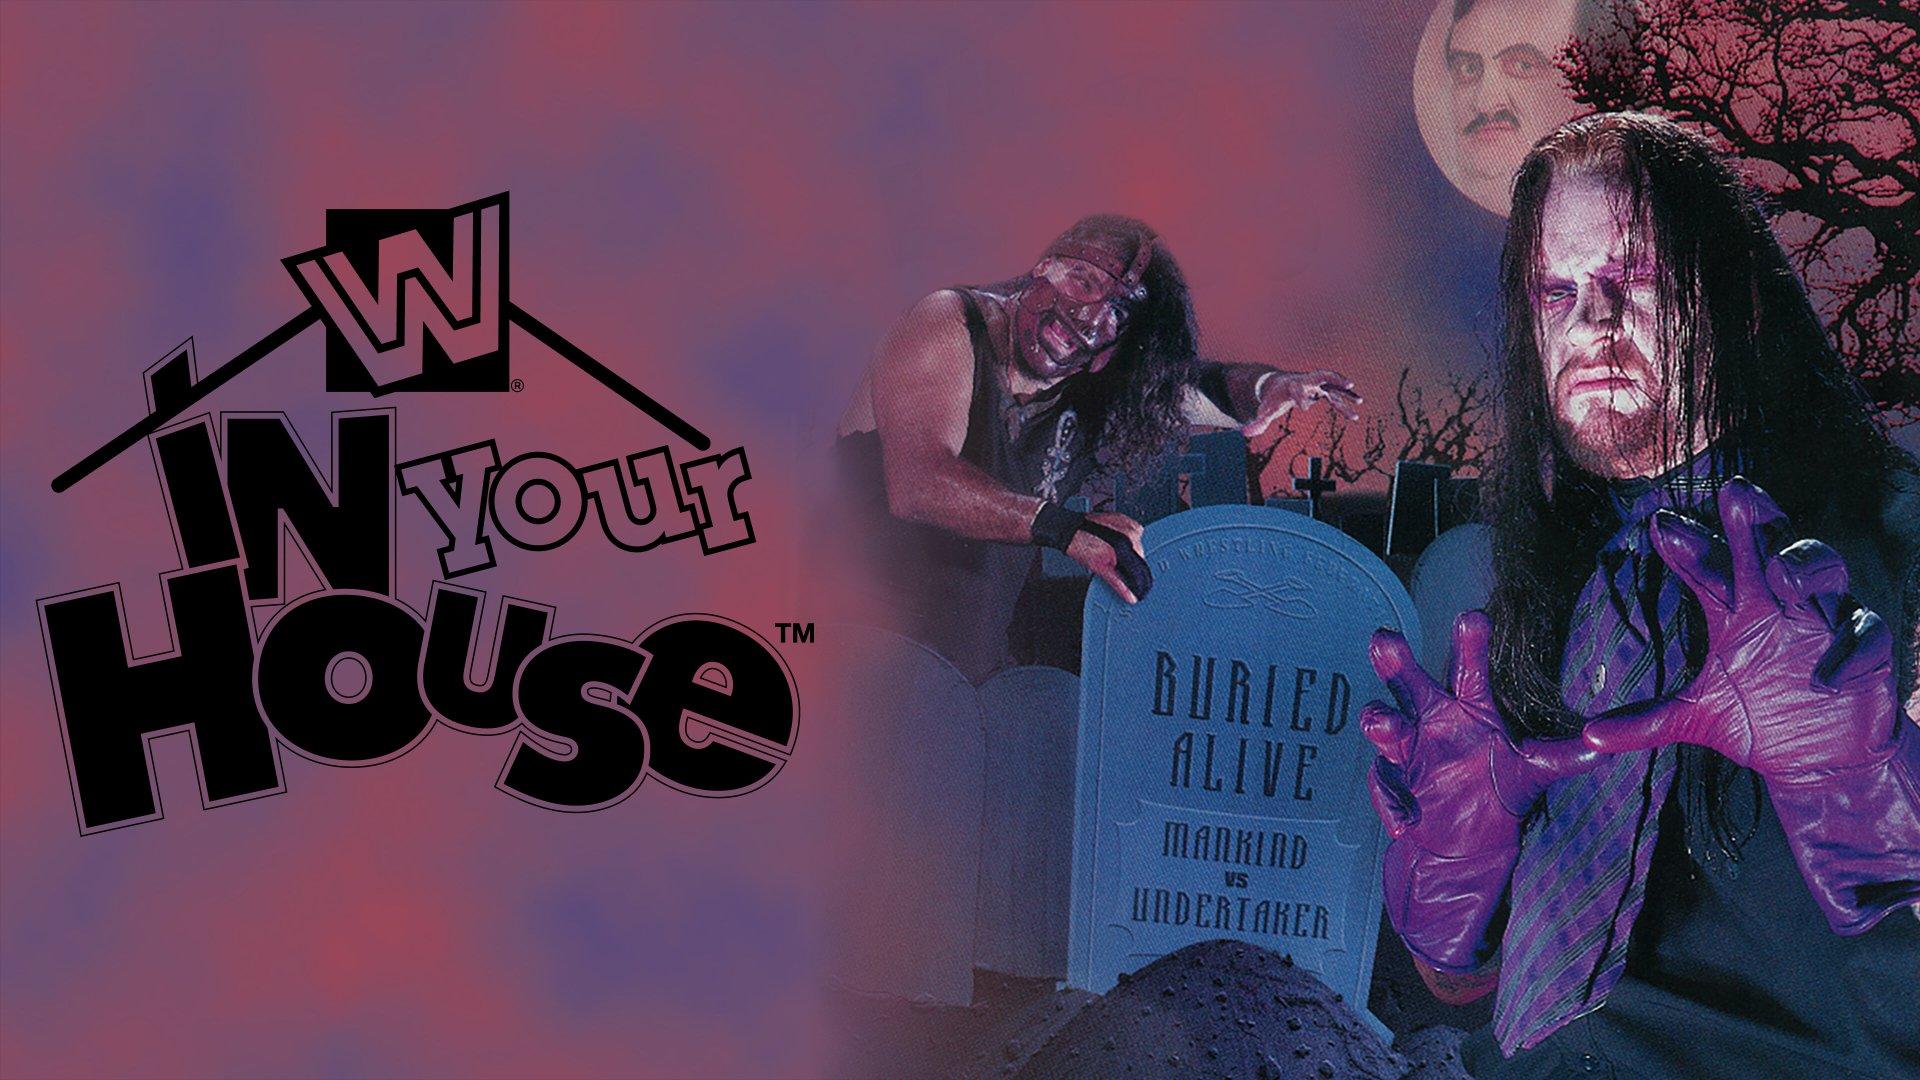 WWE In Your House: Buried Alive